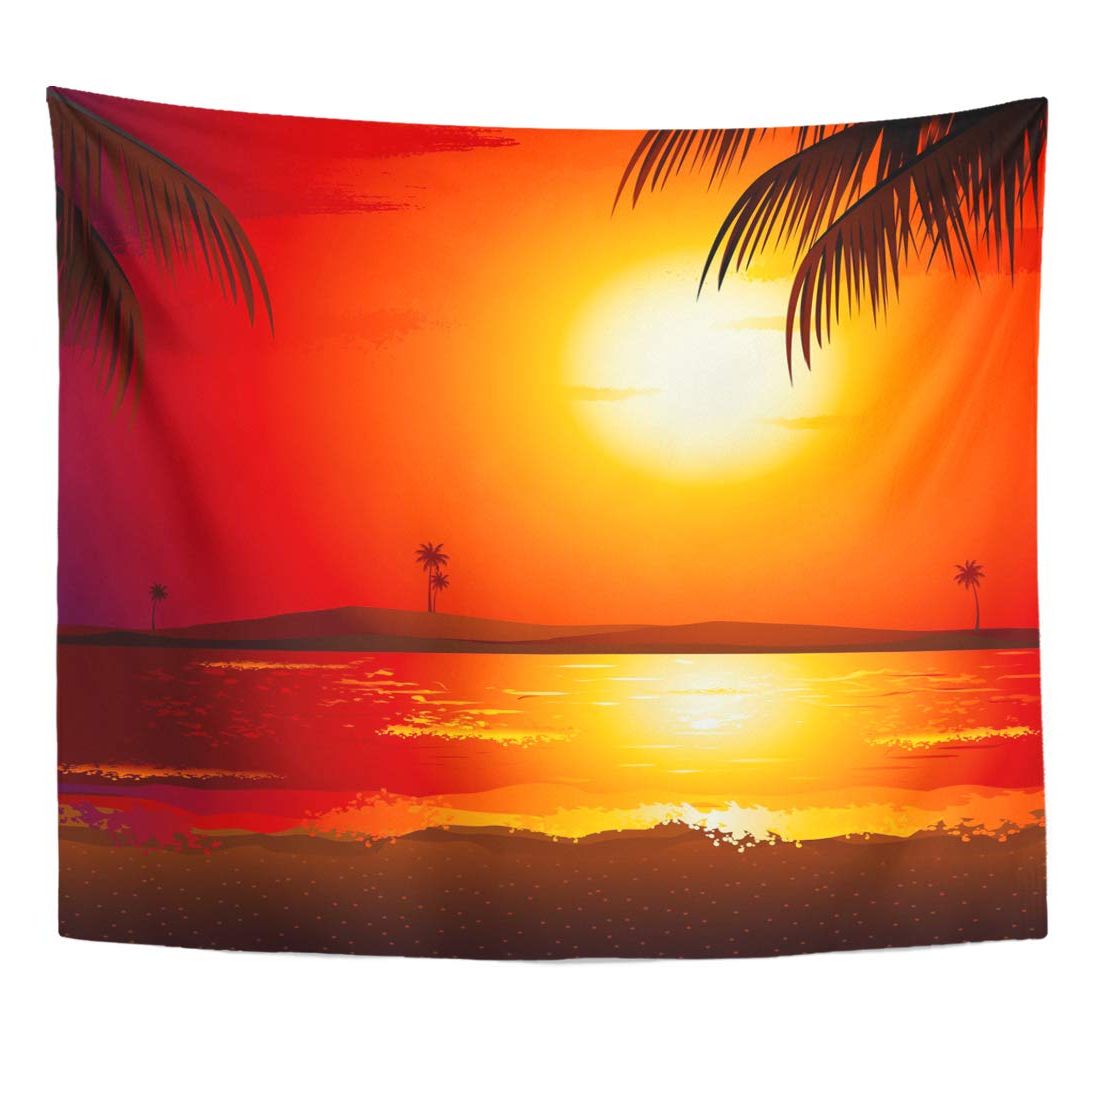 Zealgned Evening Tropical Sunset View In Beach With Palm Tree Sea Scene  Scenery Wall Art Hanging Tapestry Home Decor For Living Room Bedroom Dorm  60x80 Inch – Walmart – Walmart Throughout Most Recent Tropical Evening Wall Art (Photo 15 of 15)